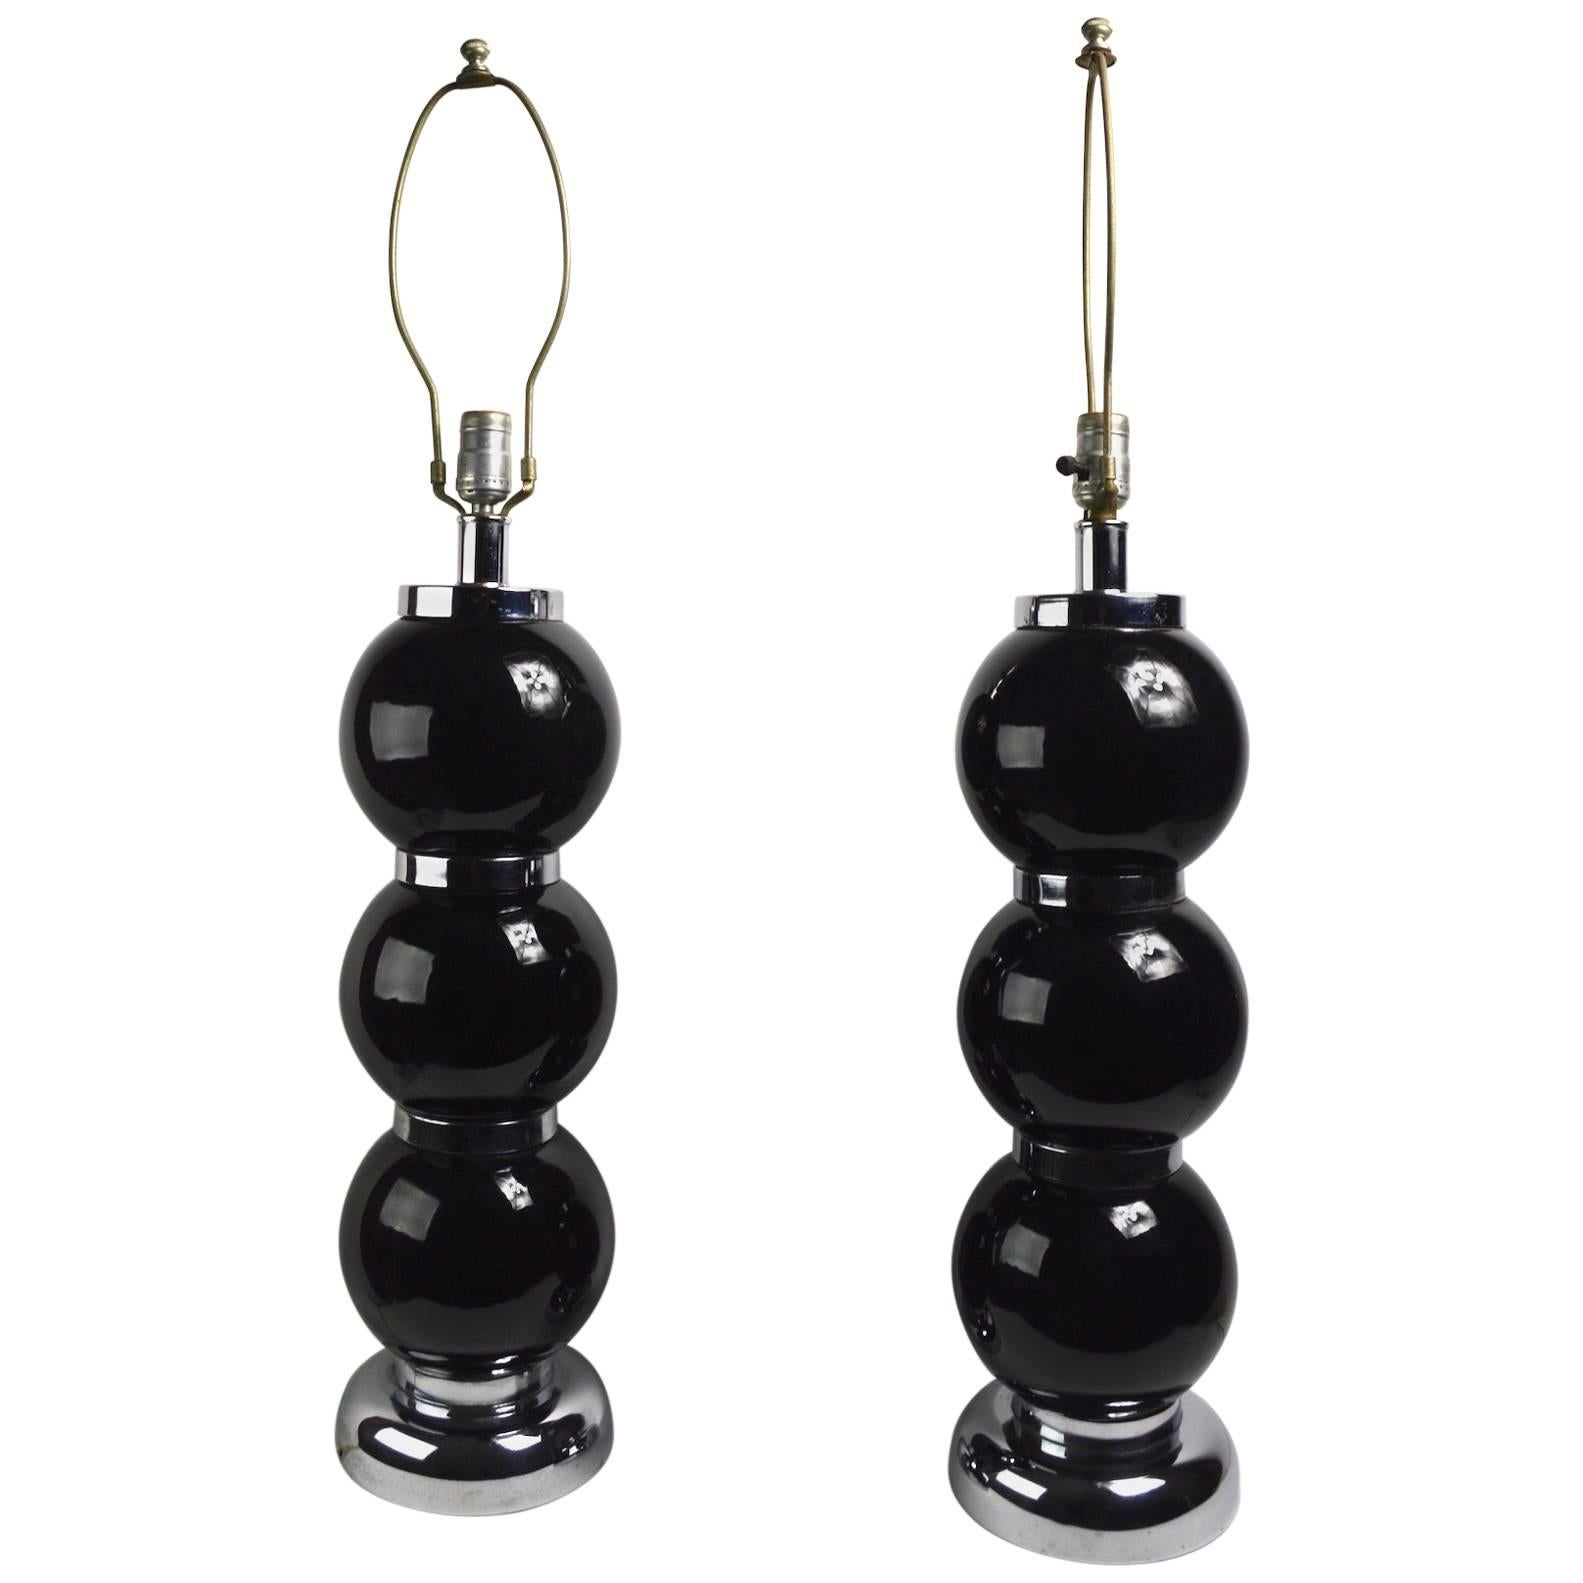 Pair of Black Chrome Ball Lamps by Kovacs